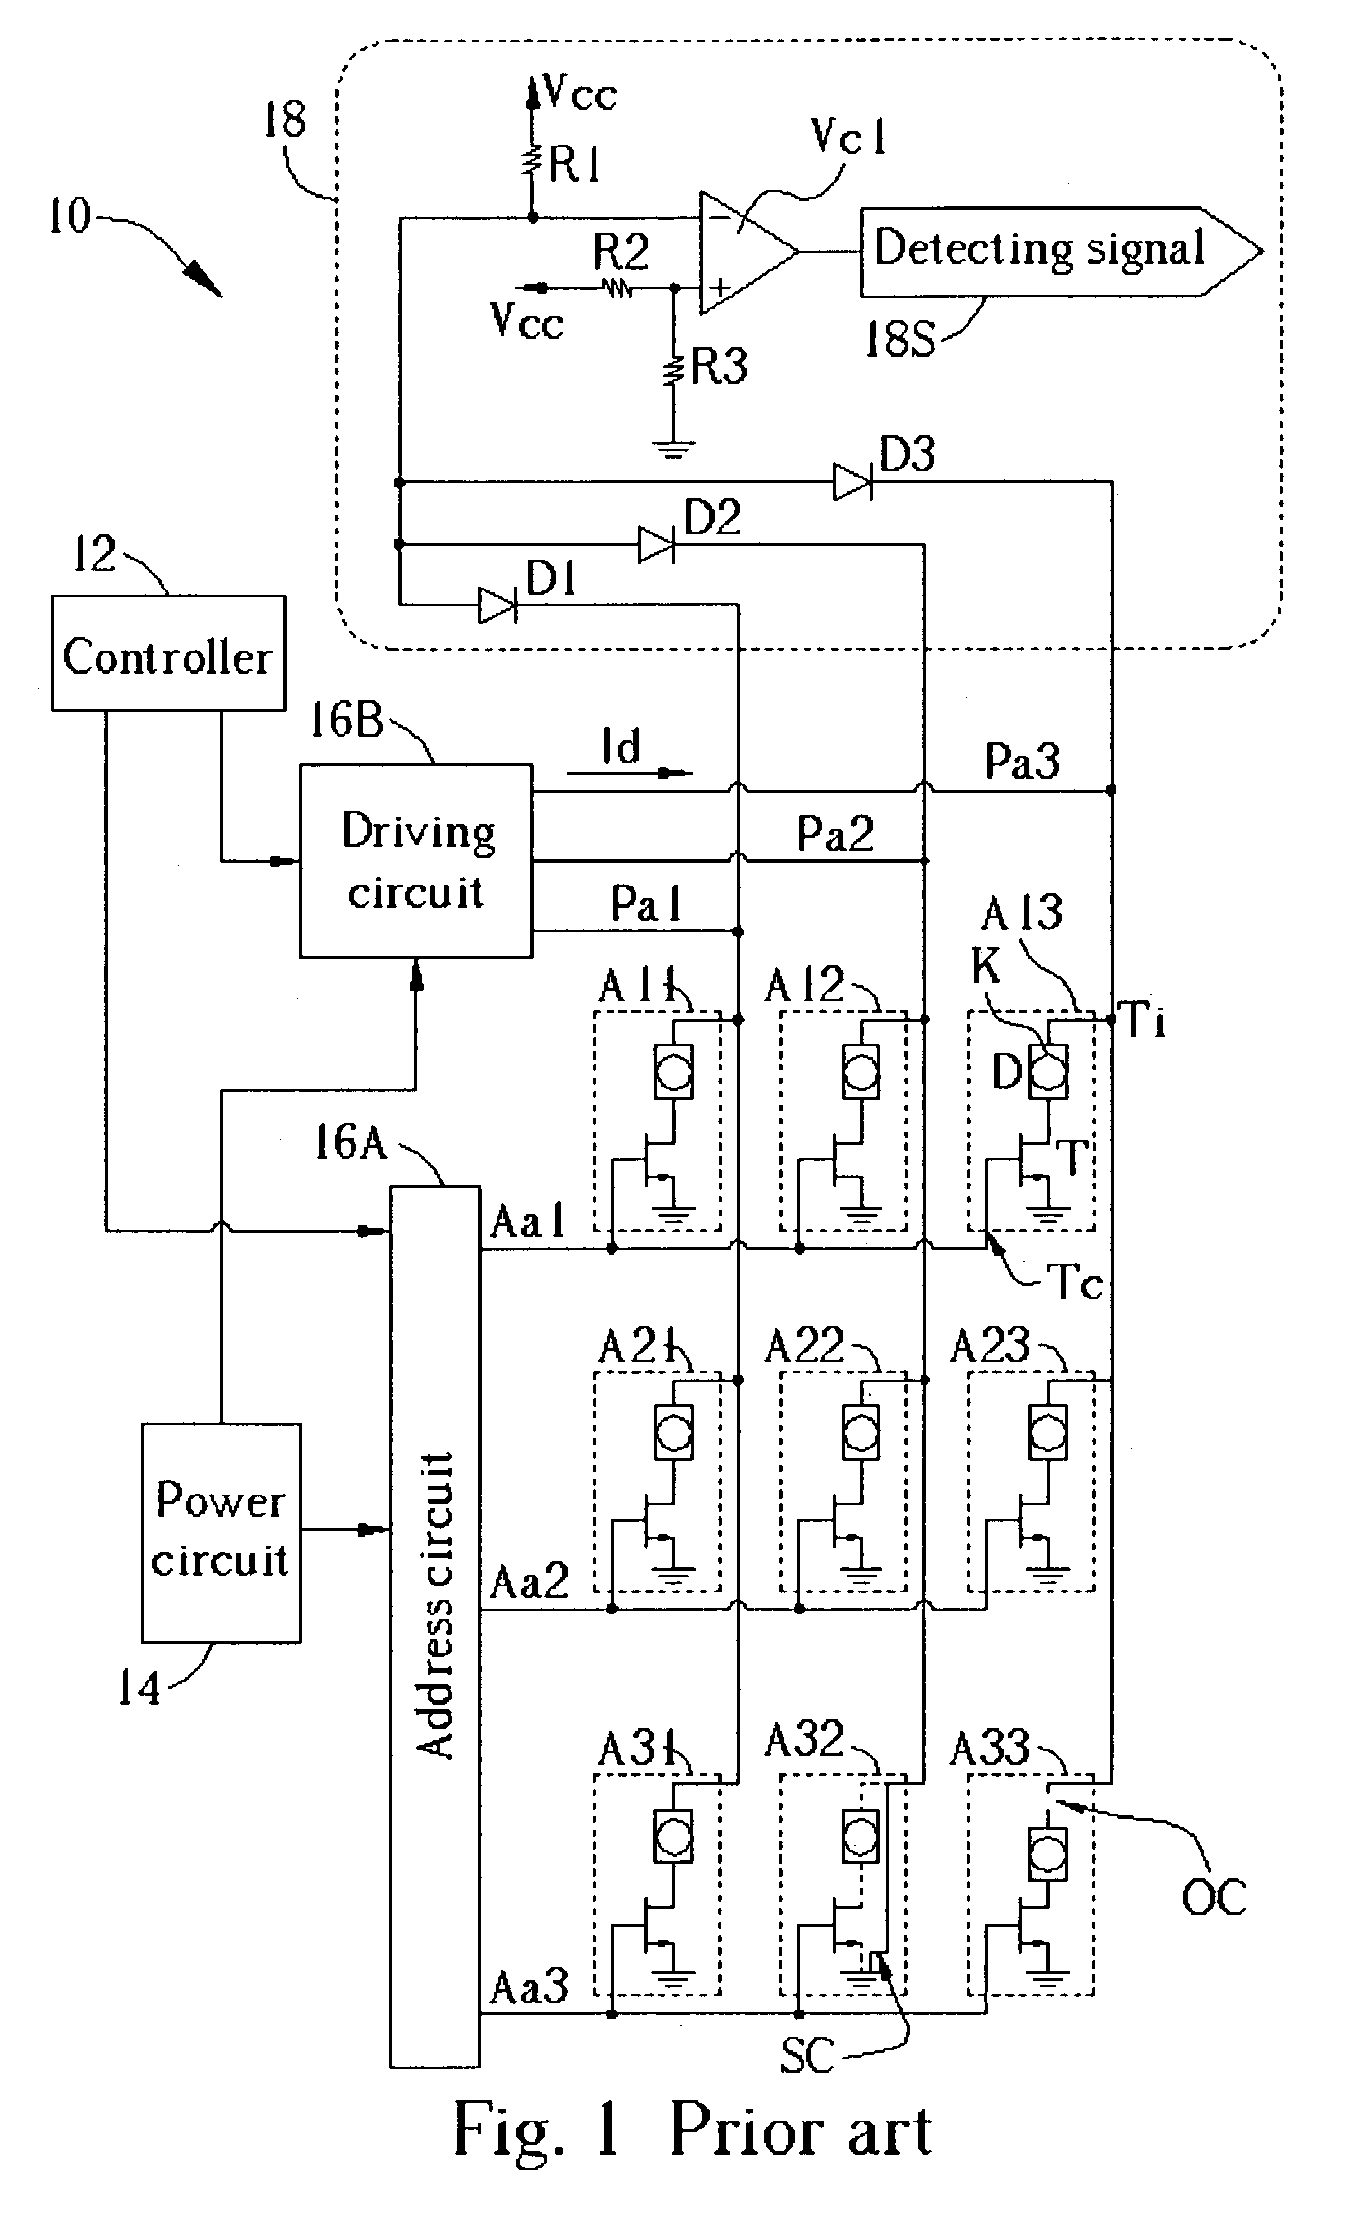 Method and related apparatus for performing short and open circuit testing of ink jet printer head